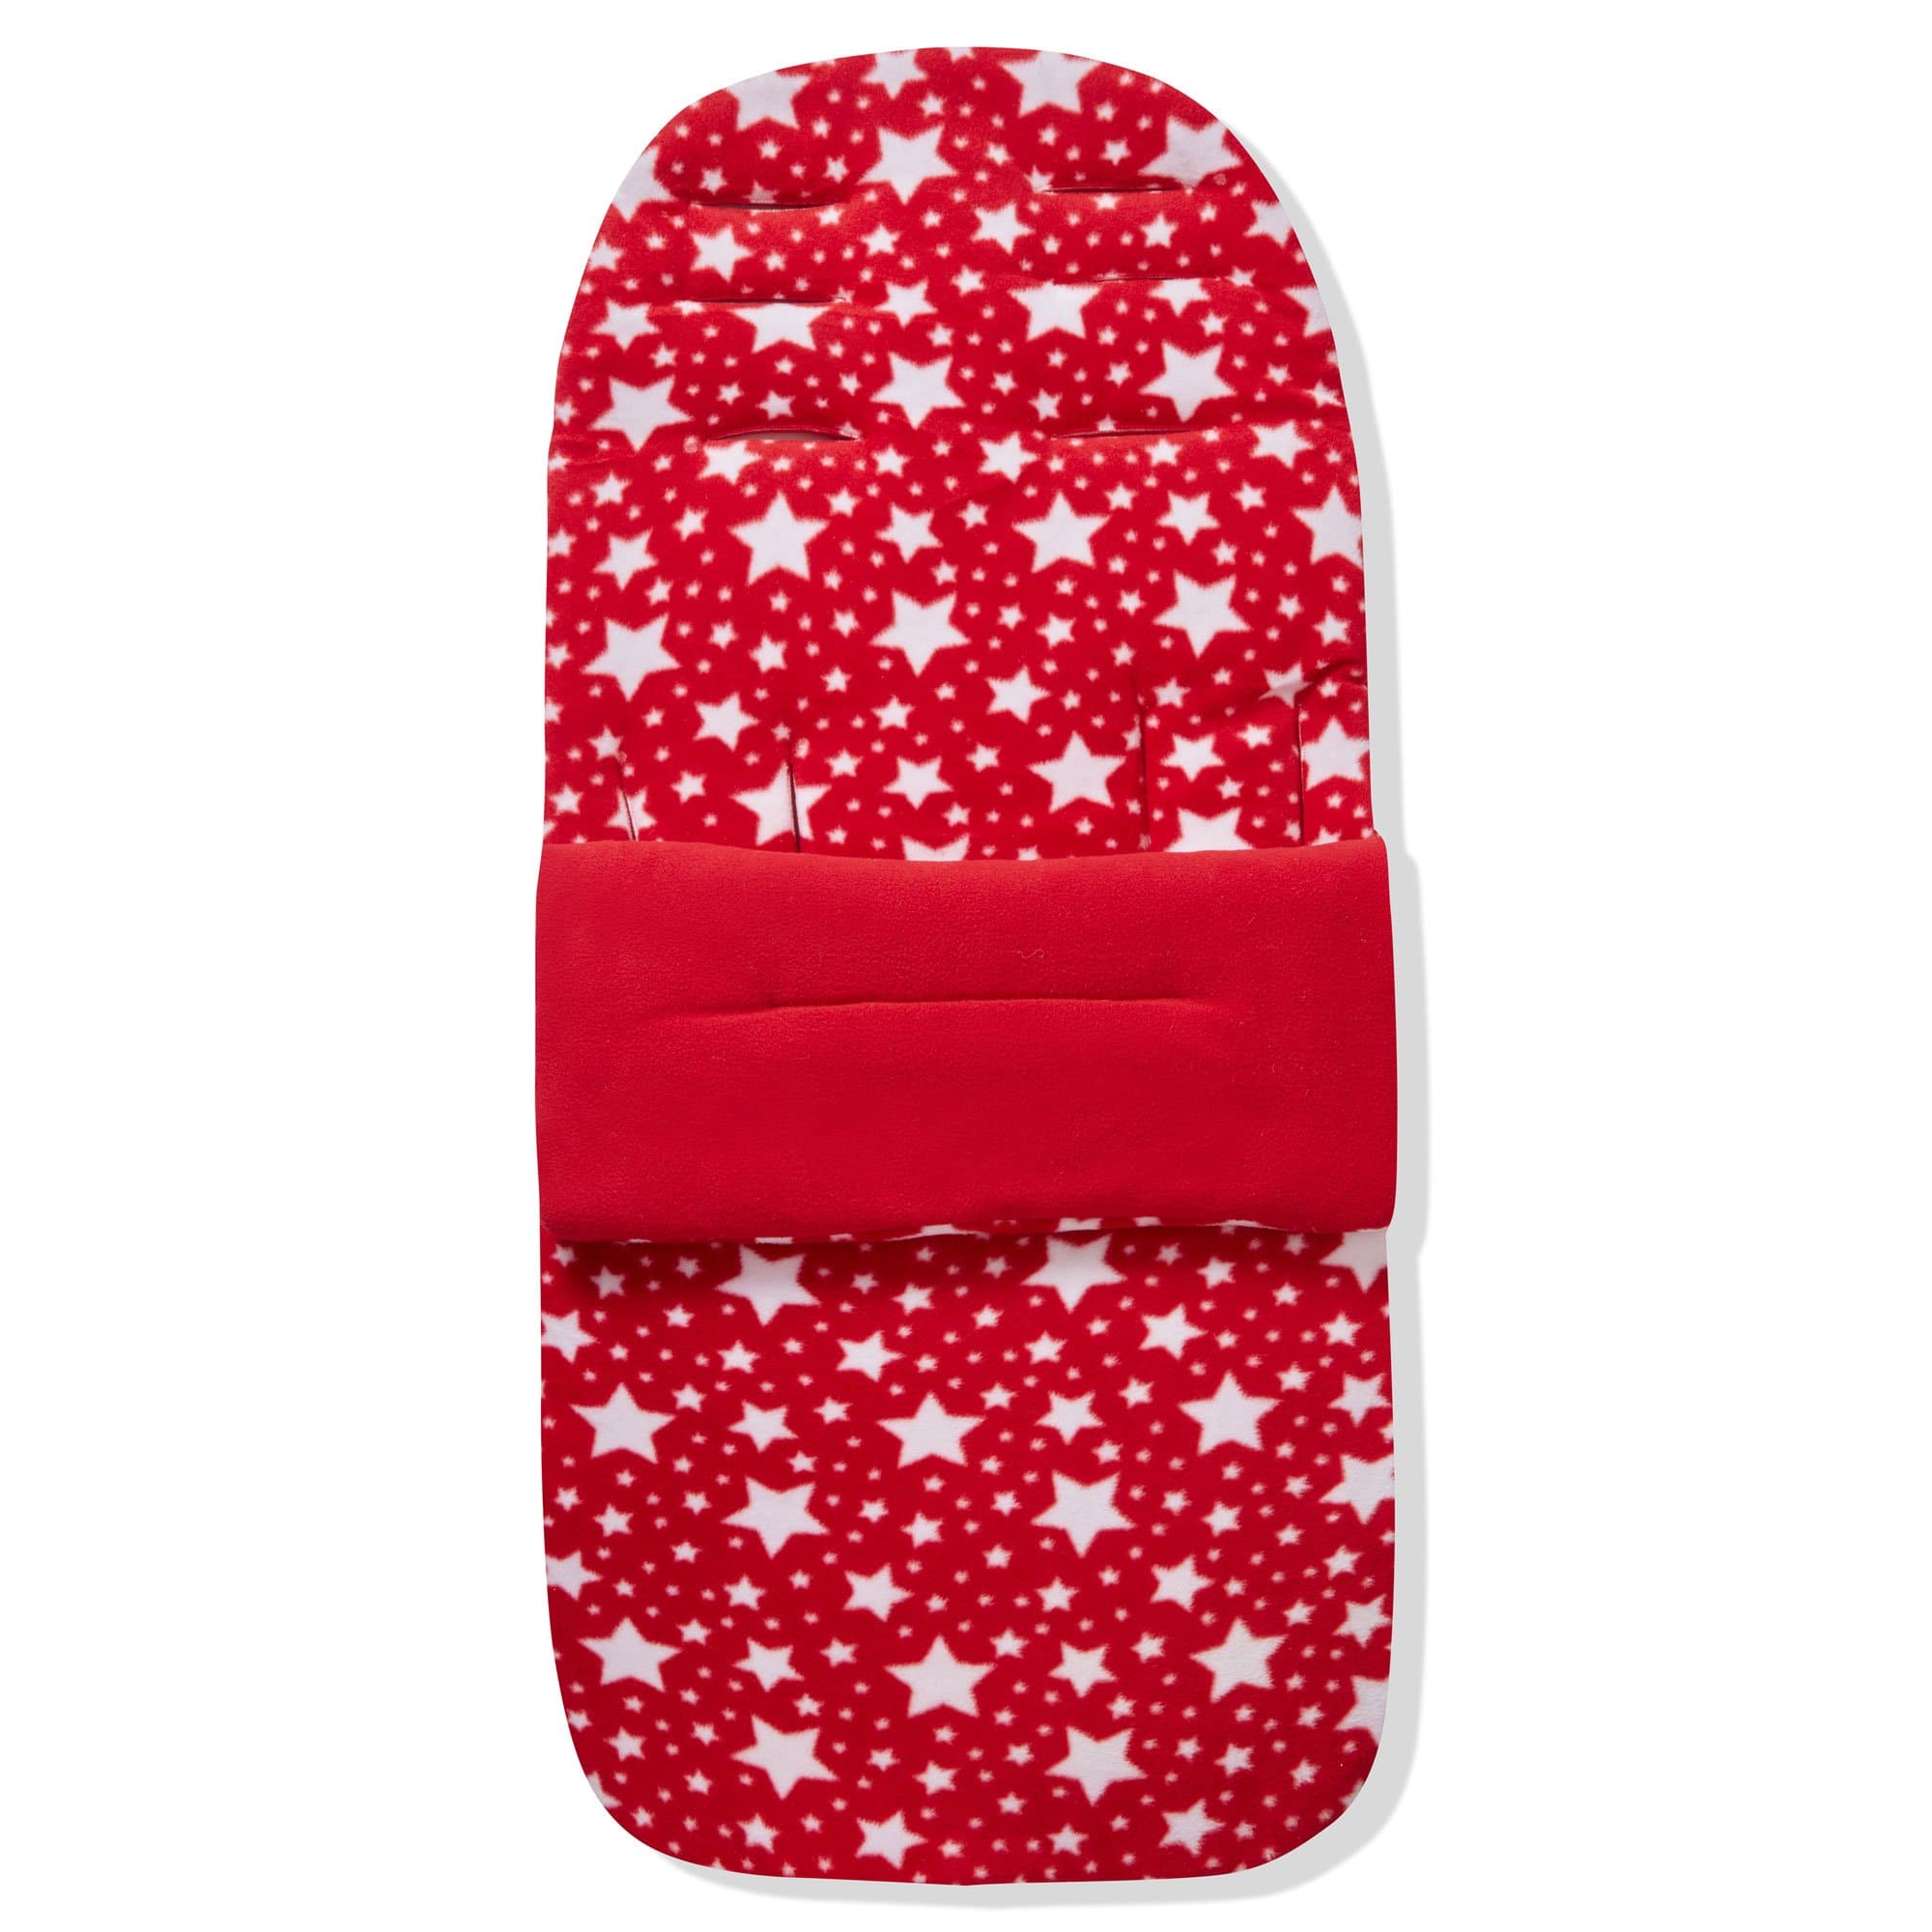 Fleece Footmuff / Cosy Toes Compatible With Brio - Red Star / Fits All Models | For Your Little One